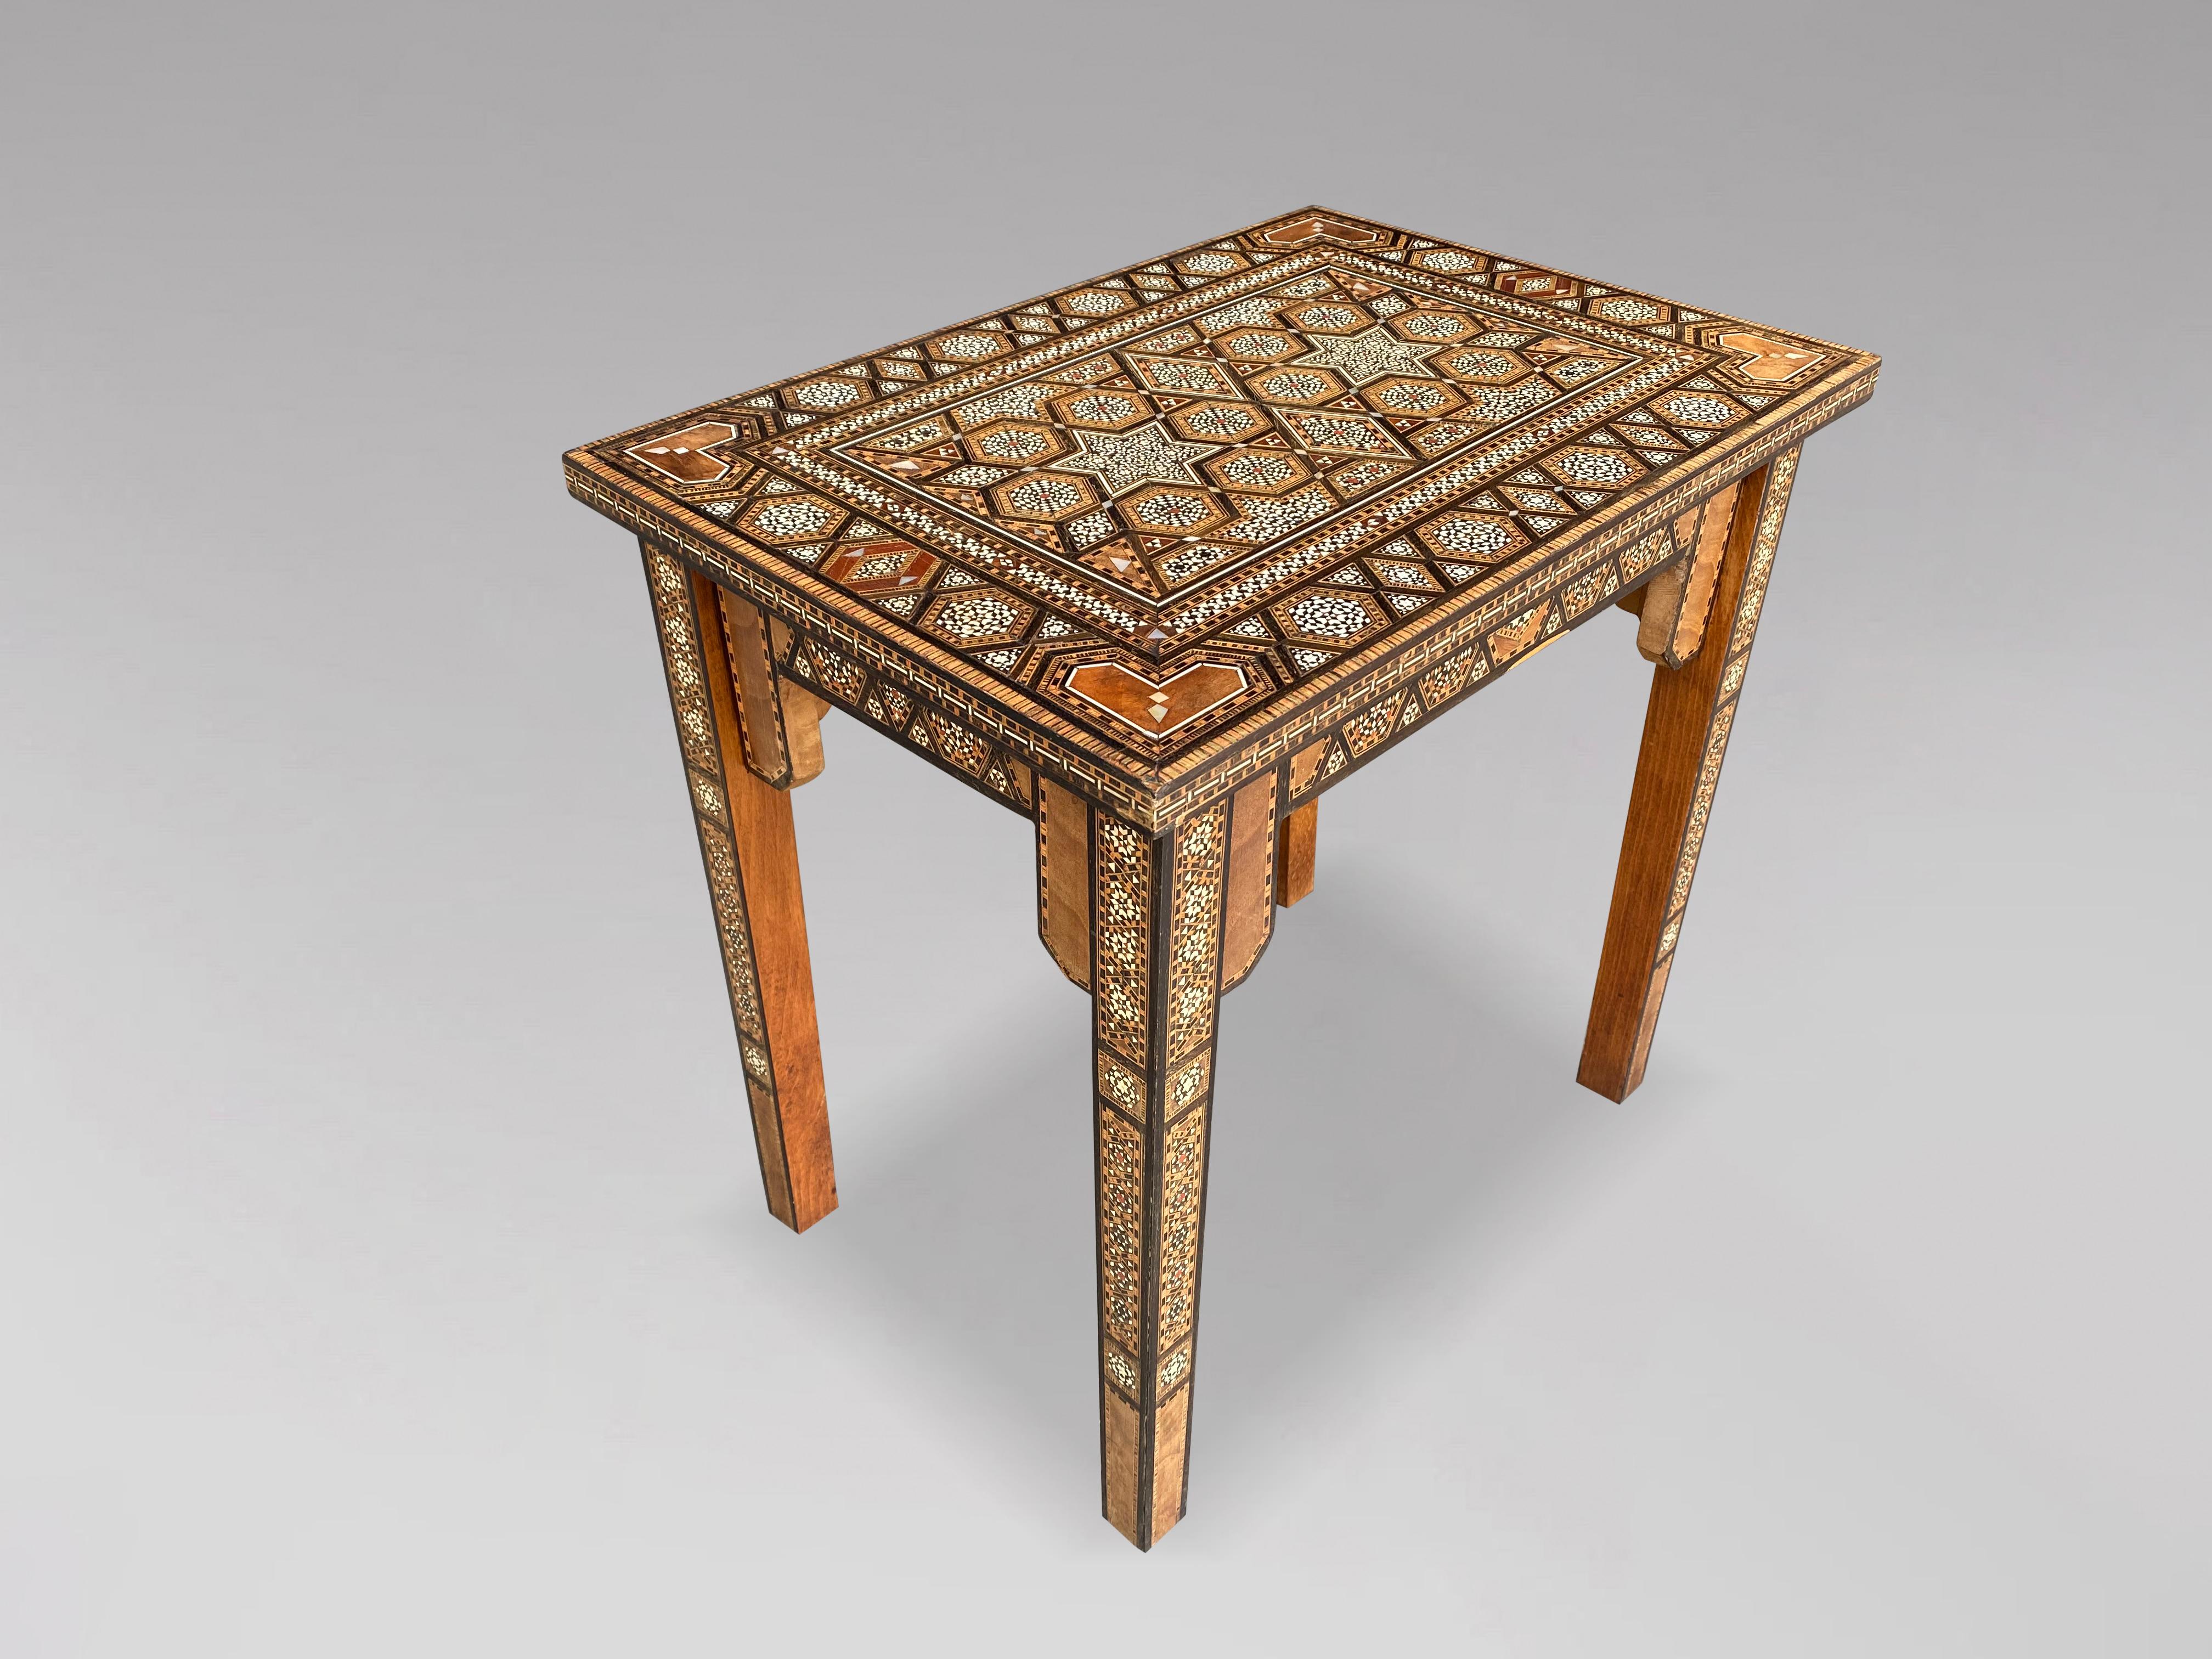 A fine early 20th century inlaid Syrian occasional table of rectangular form with an intricate geometric pattern, inlaid with mosaic bone, ebony, mother of pearl and other woods marquetry work throughout, having a shaped apron and raised upon square